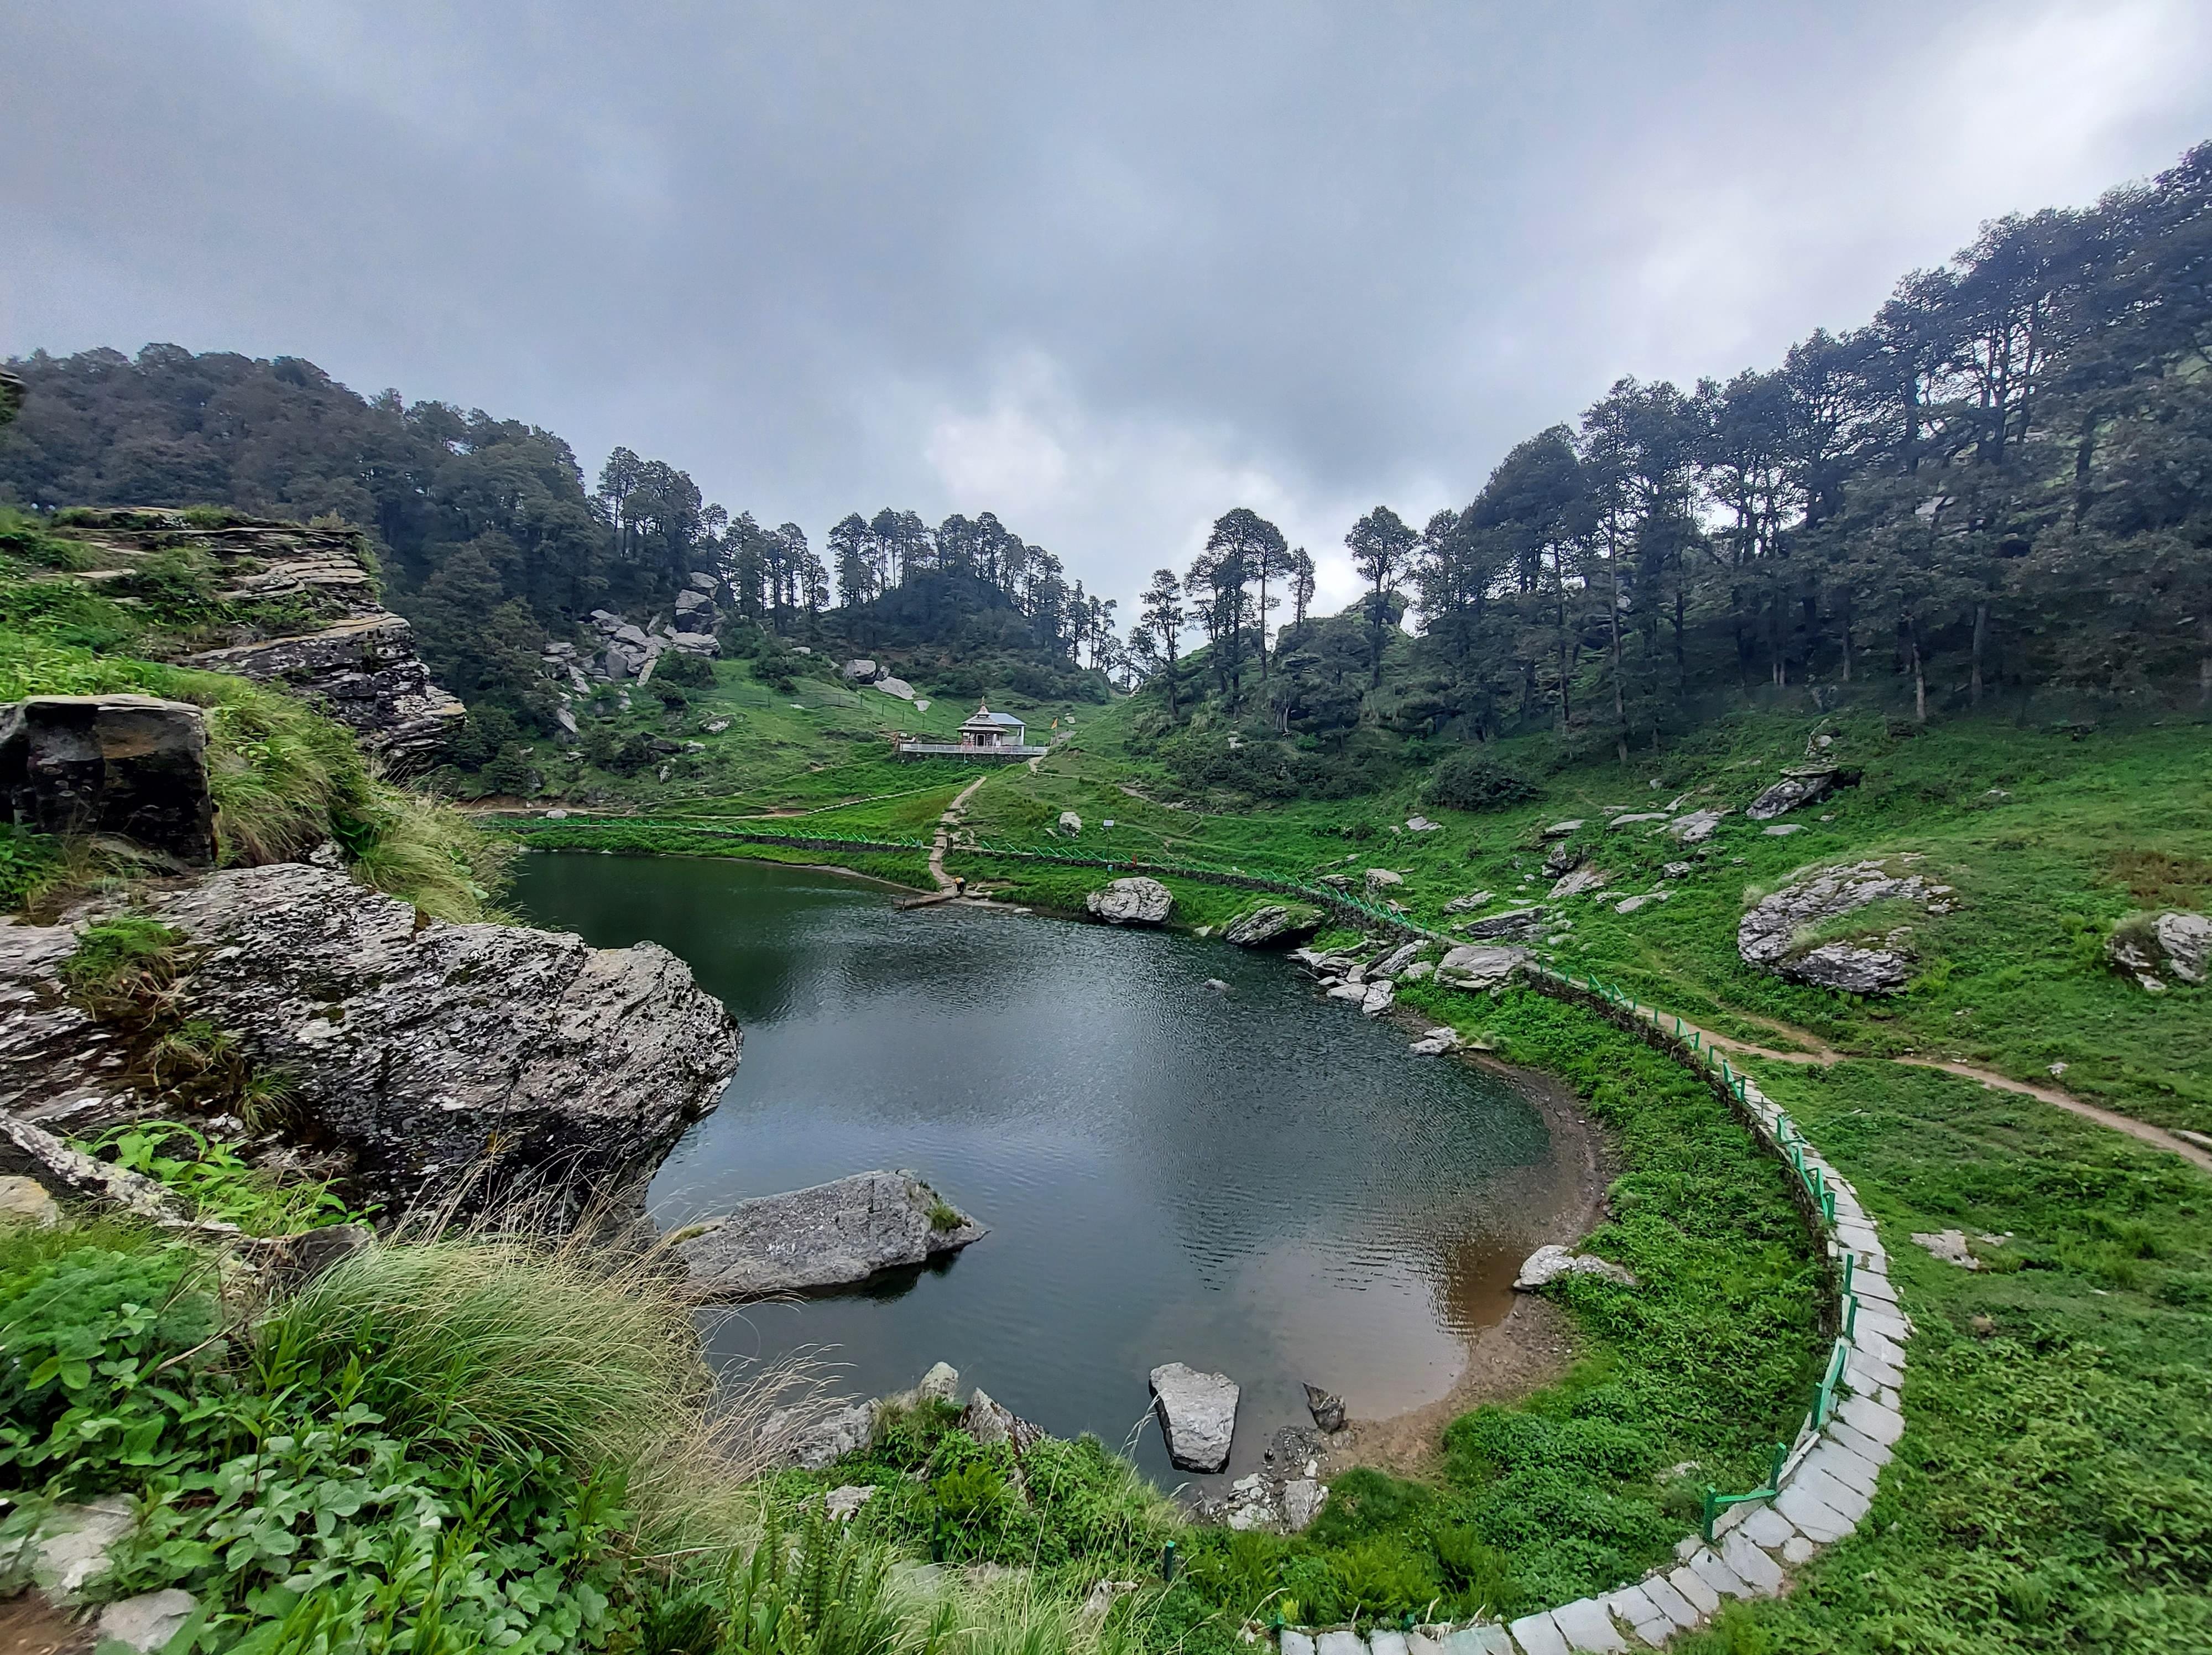 Dhanaulti Packages from Aurangabad | Get Upto 40% Off